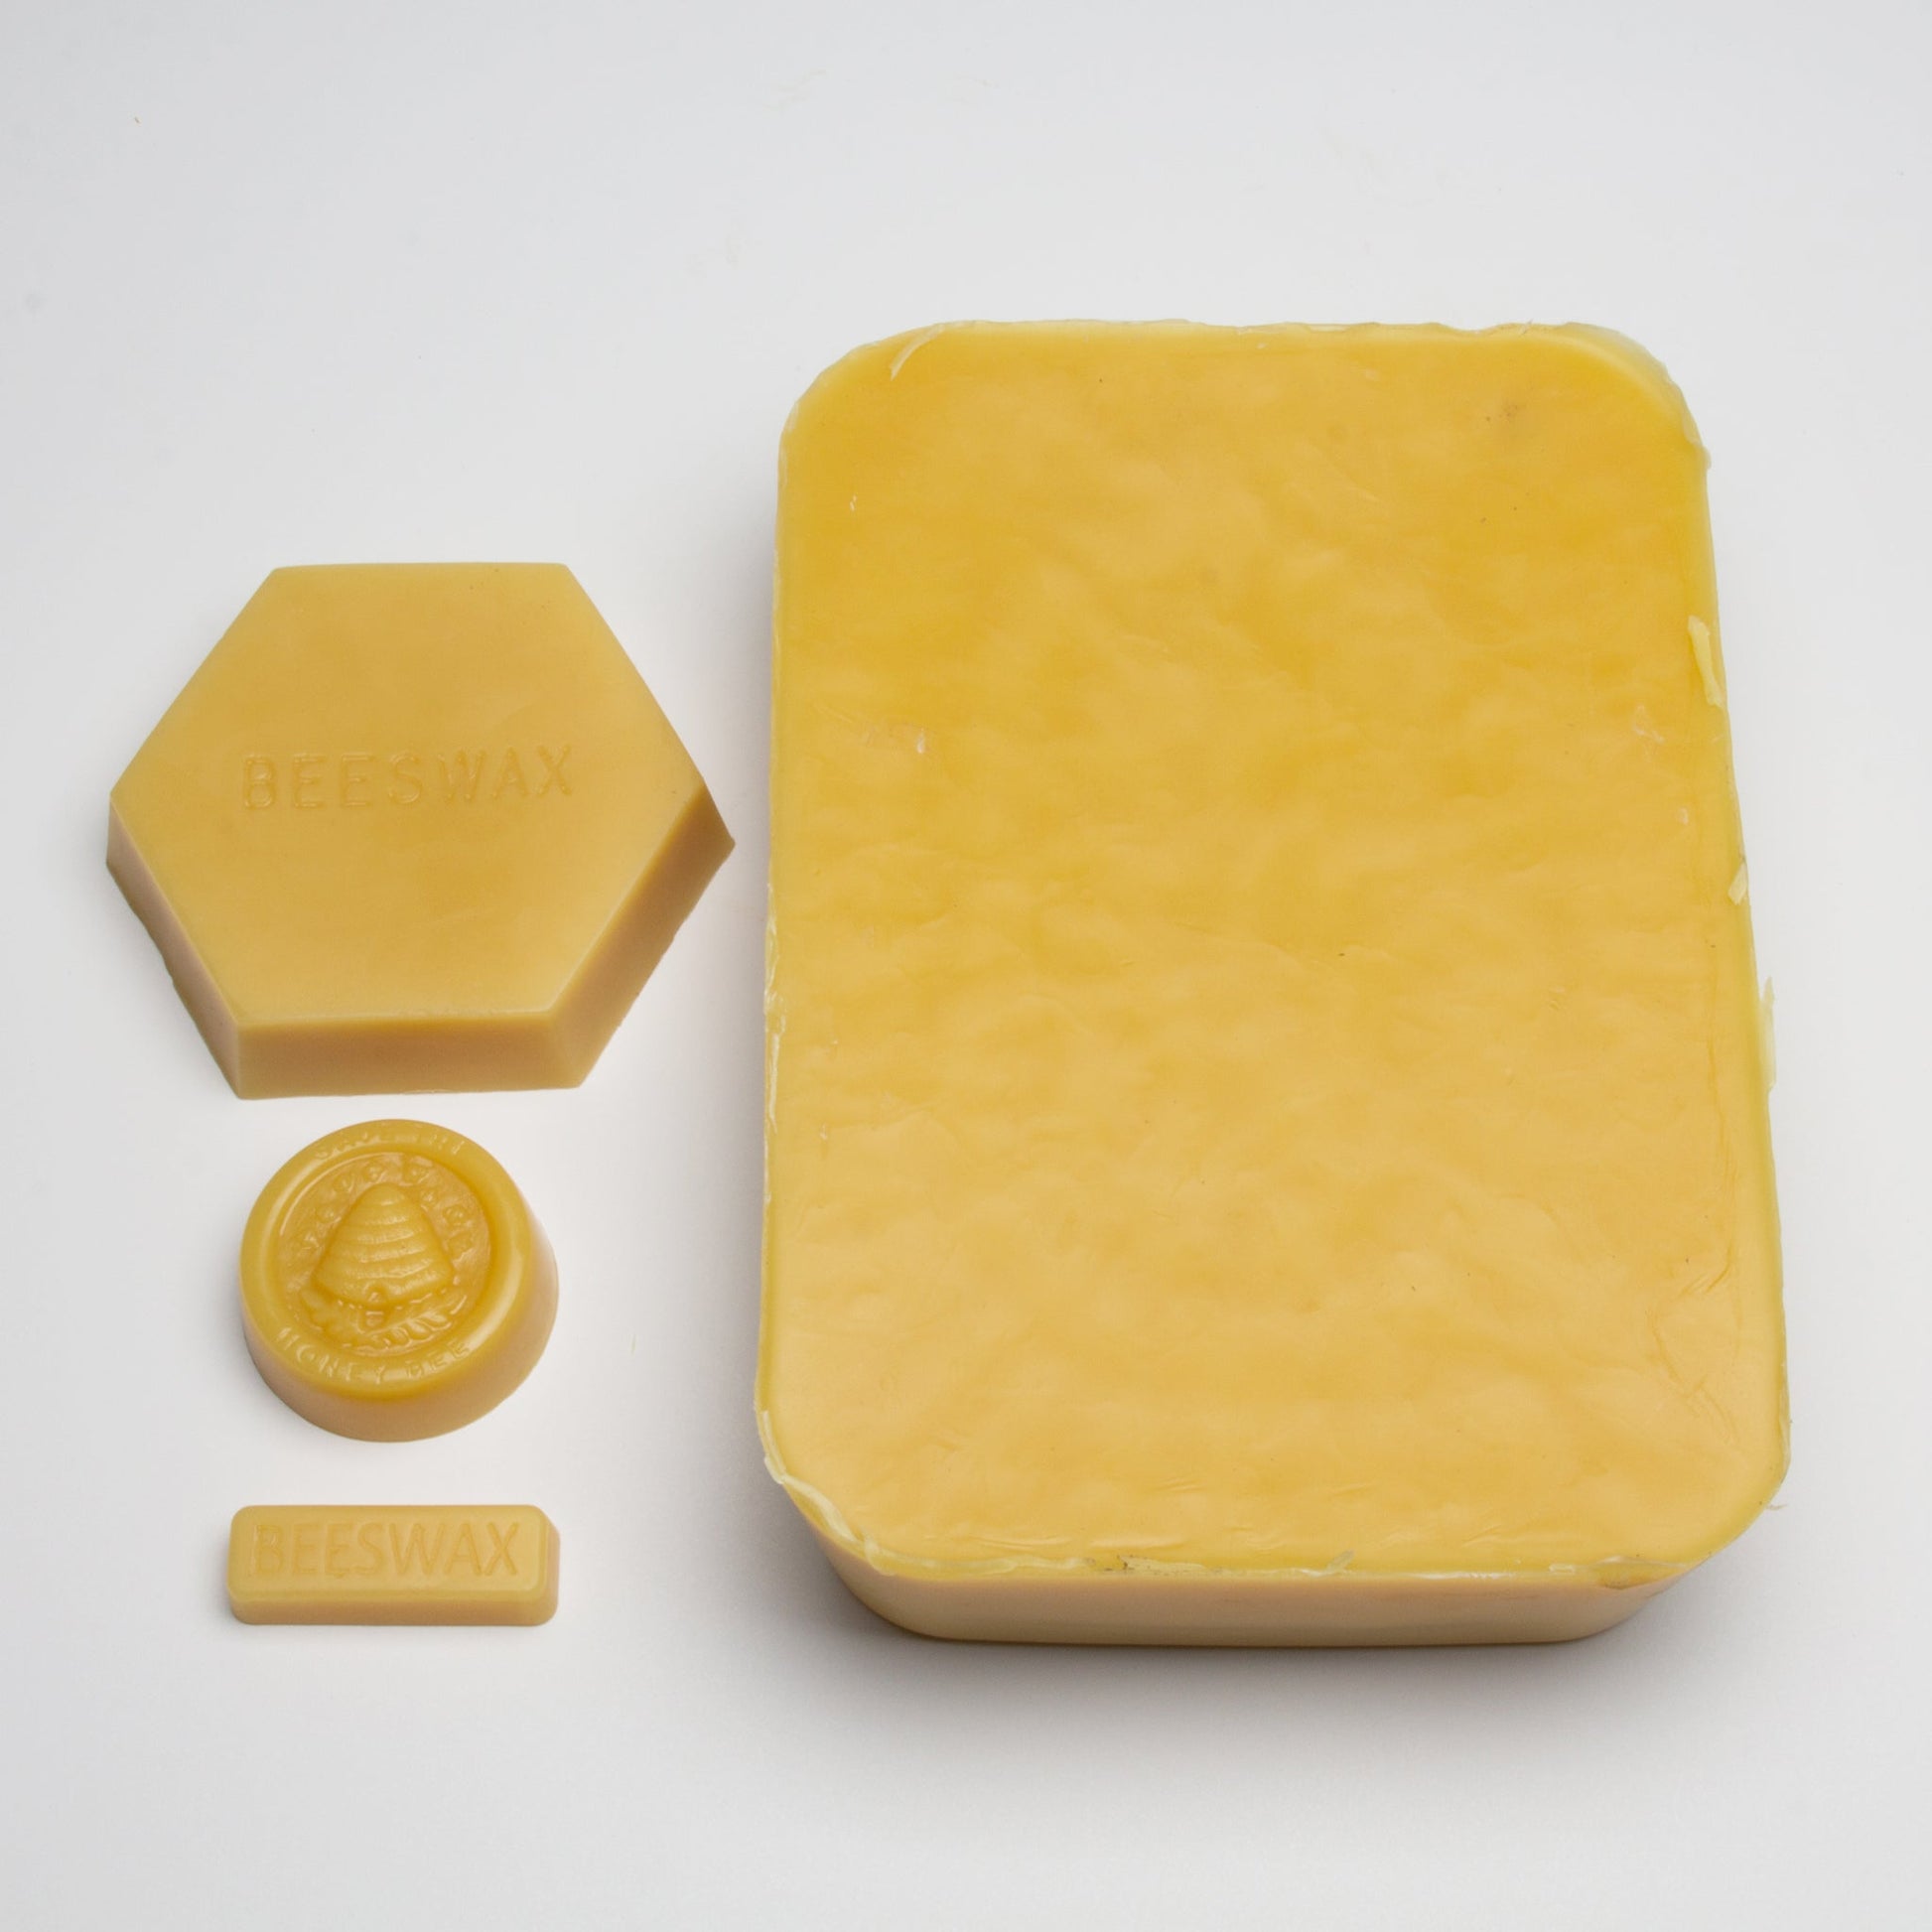 All 4 sizes of bulk beeswax.